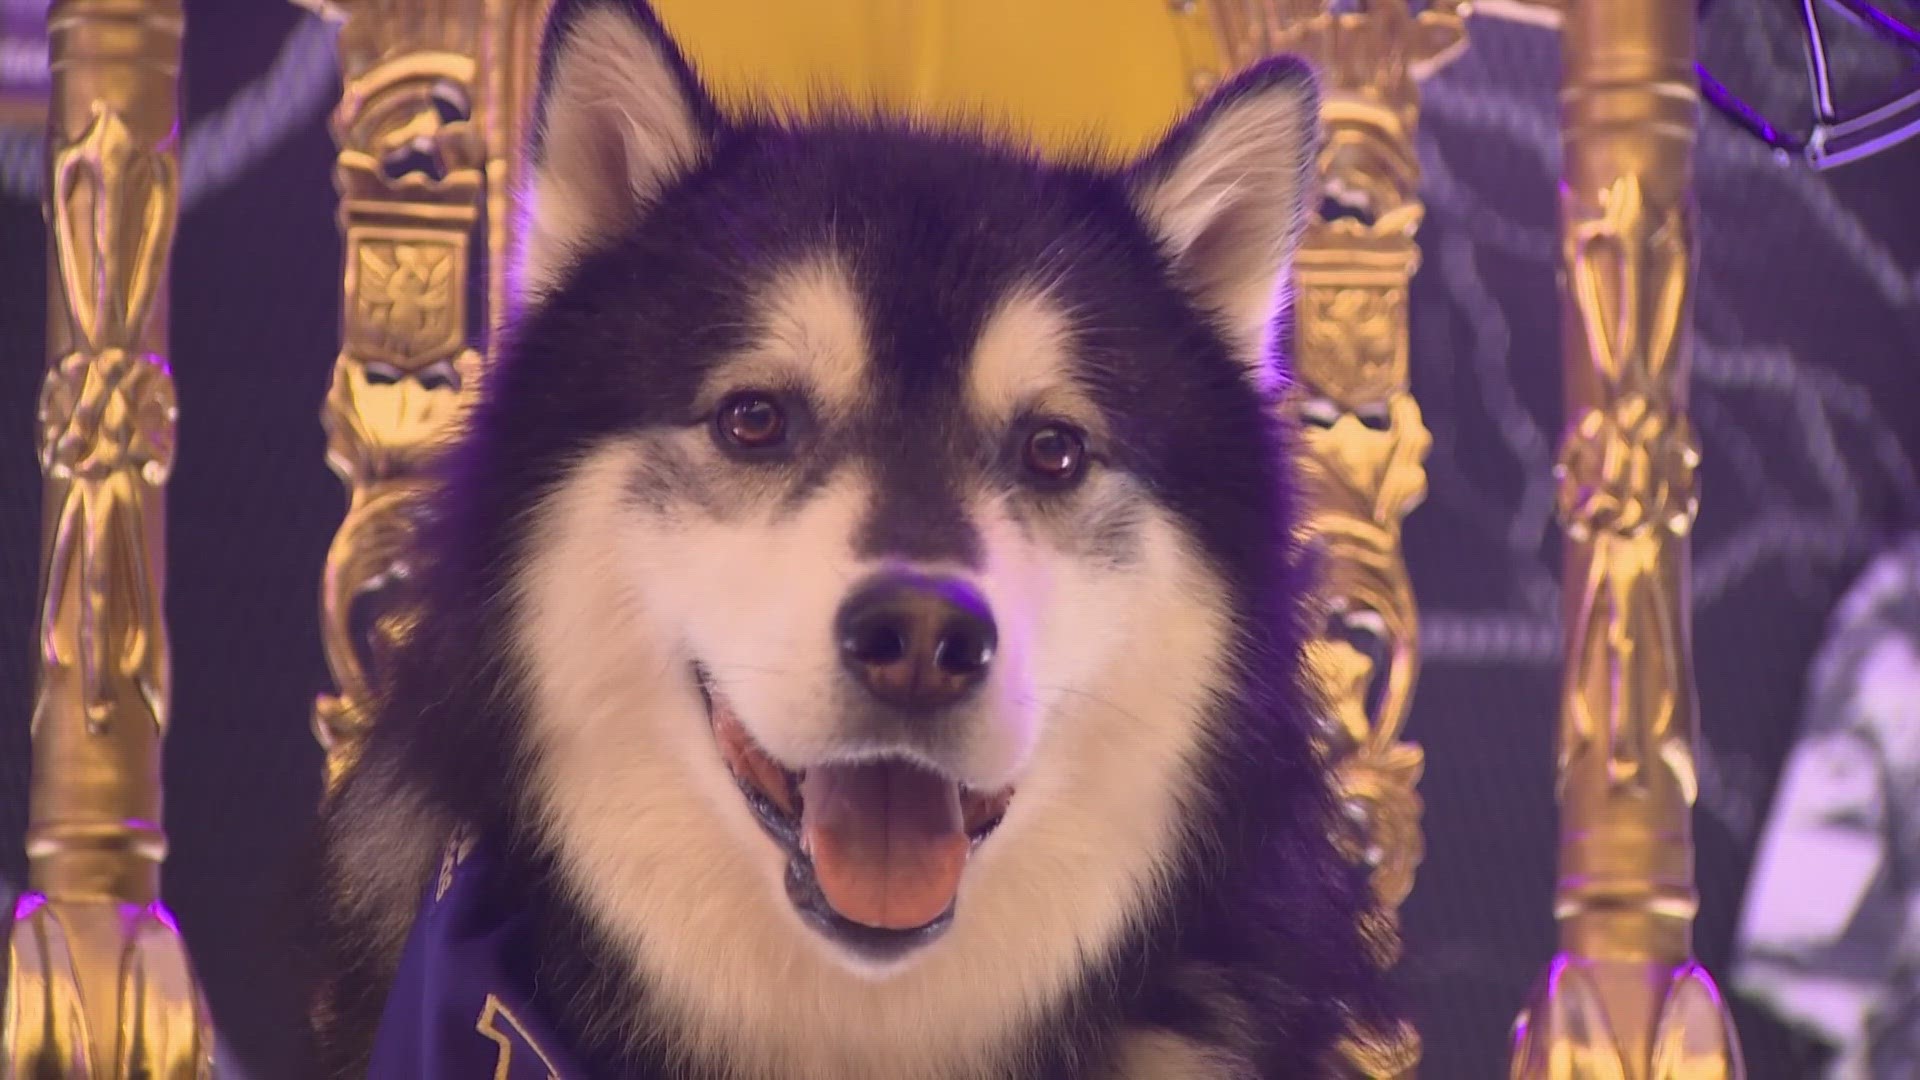 Dubs II is the 14th live mascot representing the University of Washington. The tradition started back in the 1920s. What makes Dubs II so special? KING 5 finds out.